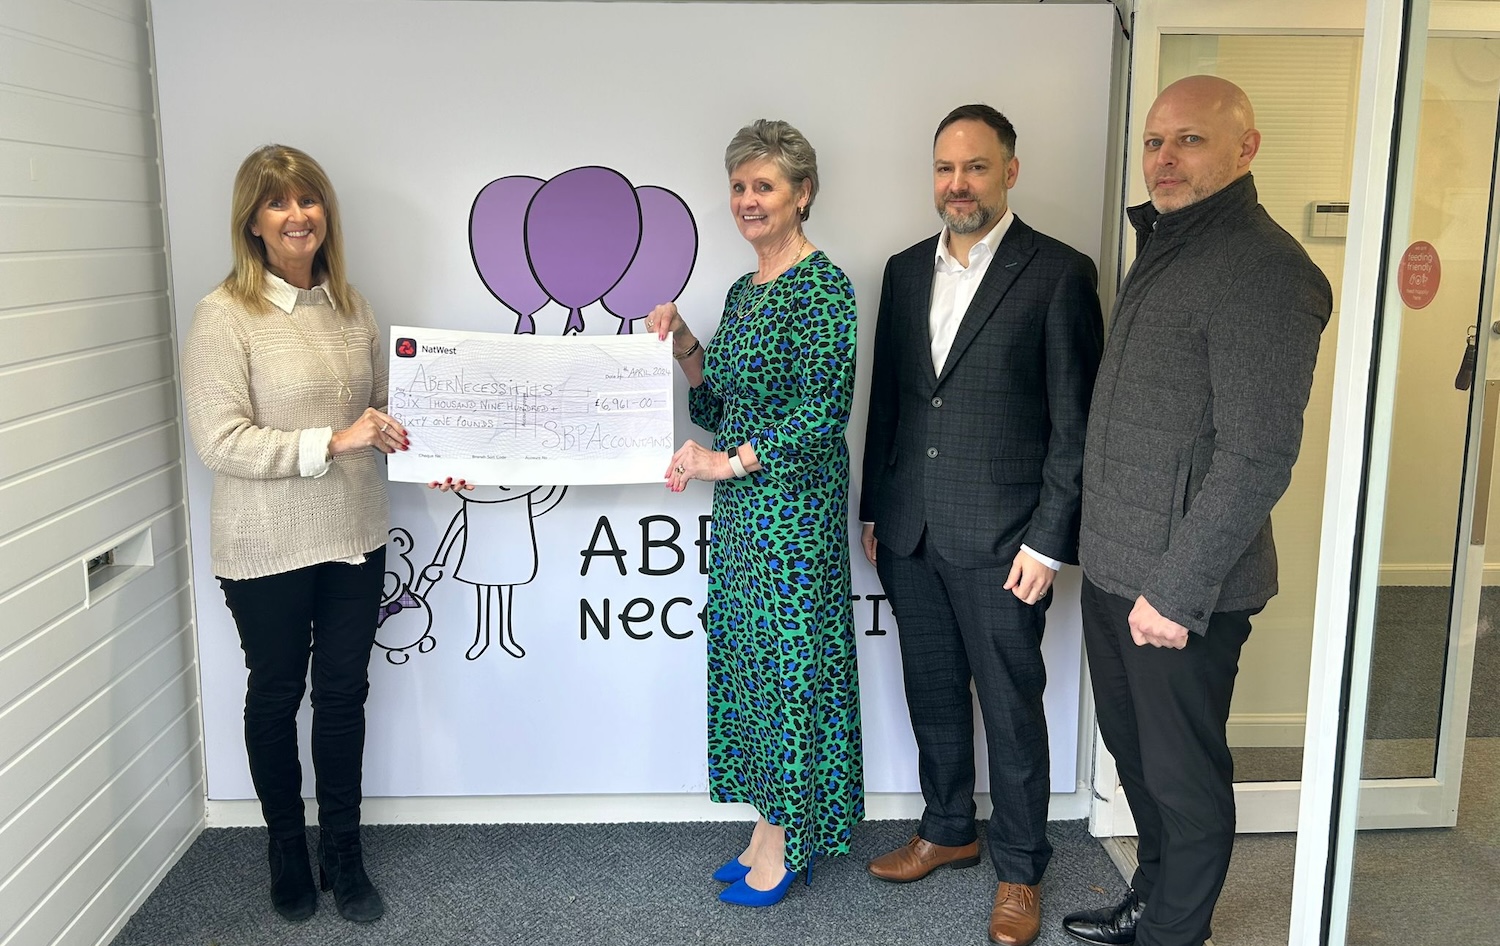 SBP Accountants raises nearly £7,000 for AberNecessities charity